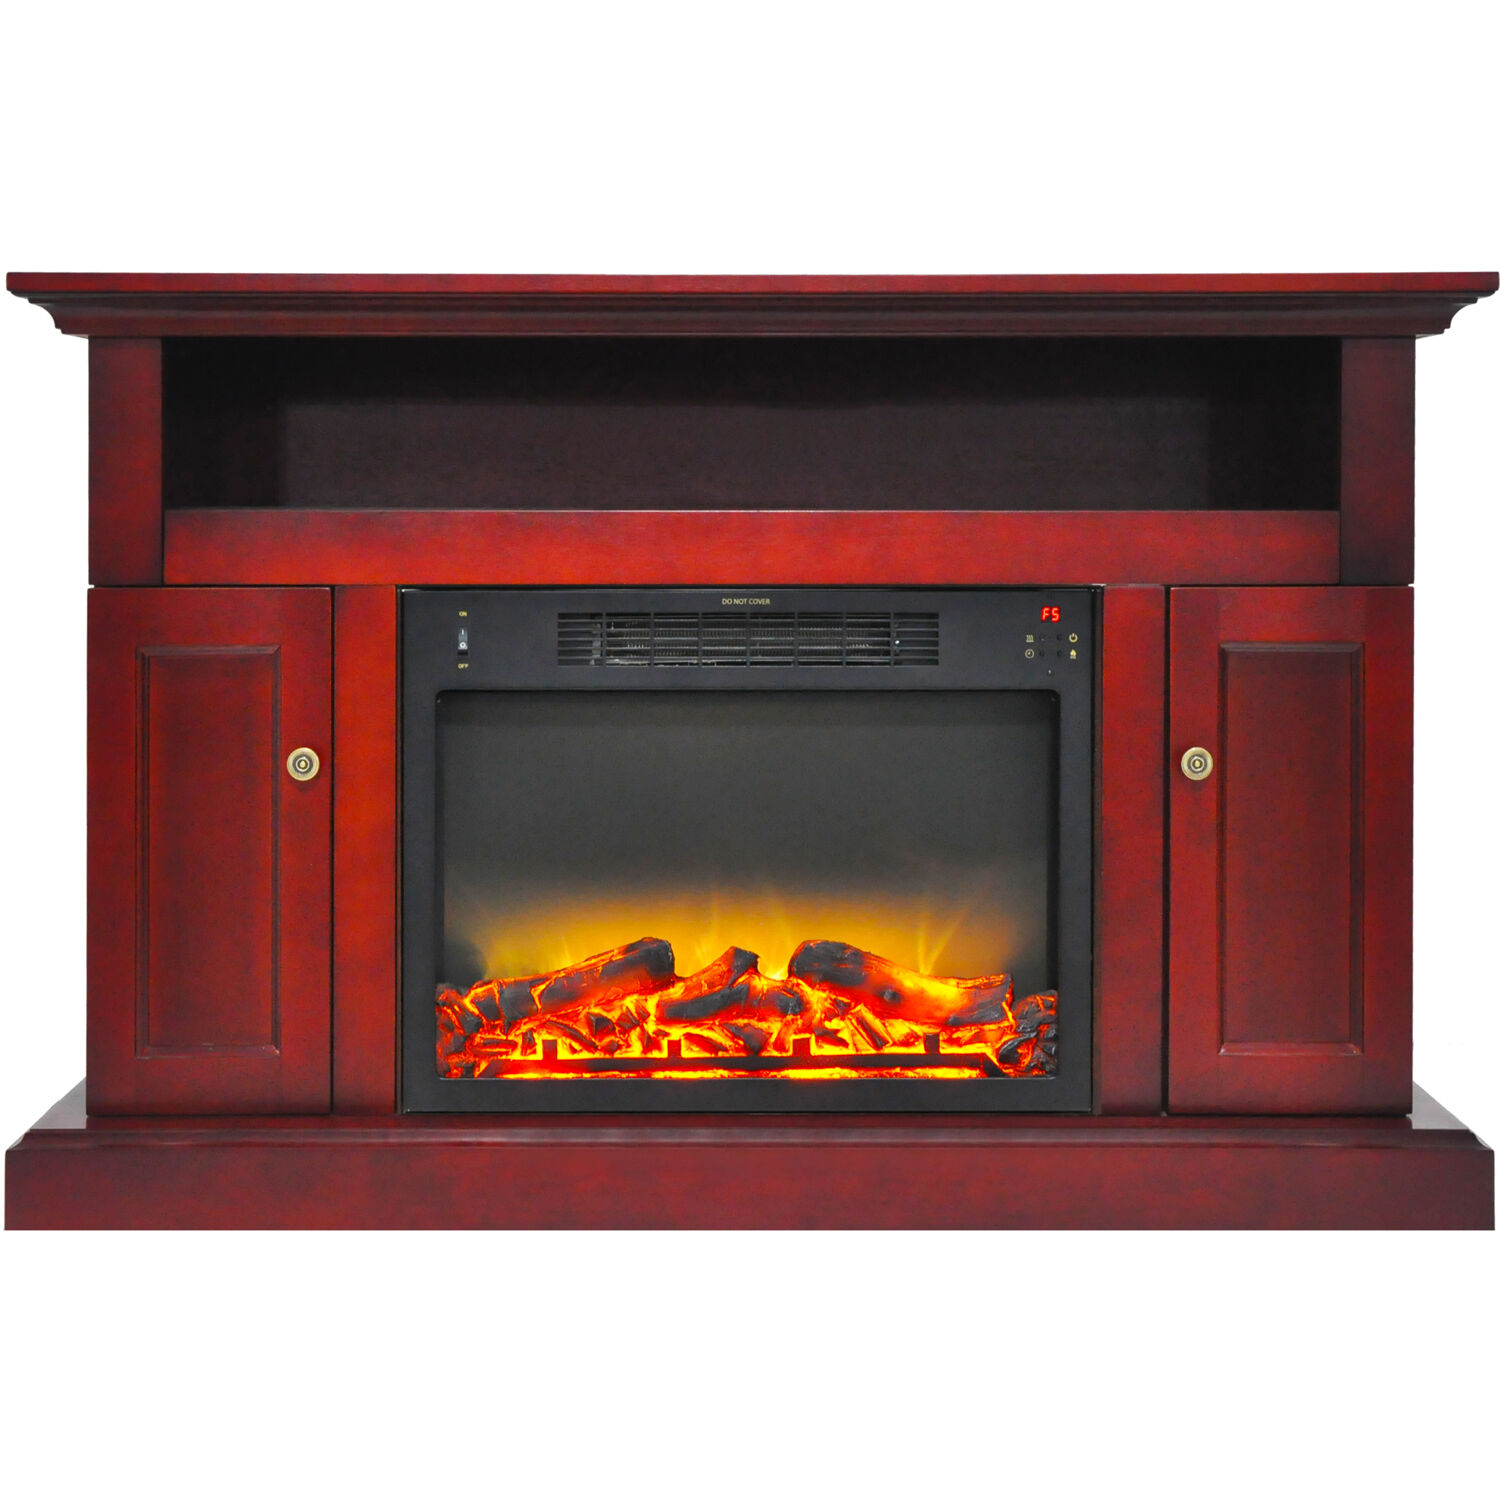 Hanover Kingsford Electric Fireplace with an Enhanced Log Display and 47 In. Entertainment Stand in Cherry - image 1 of 1